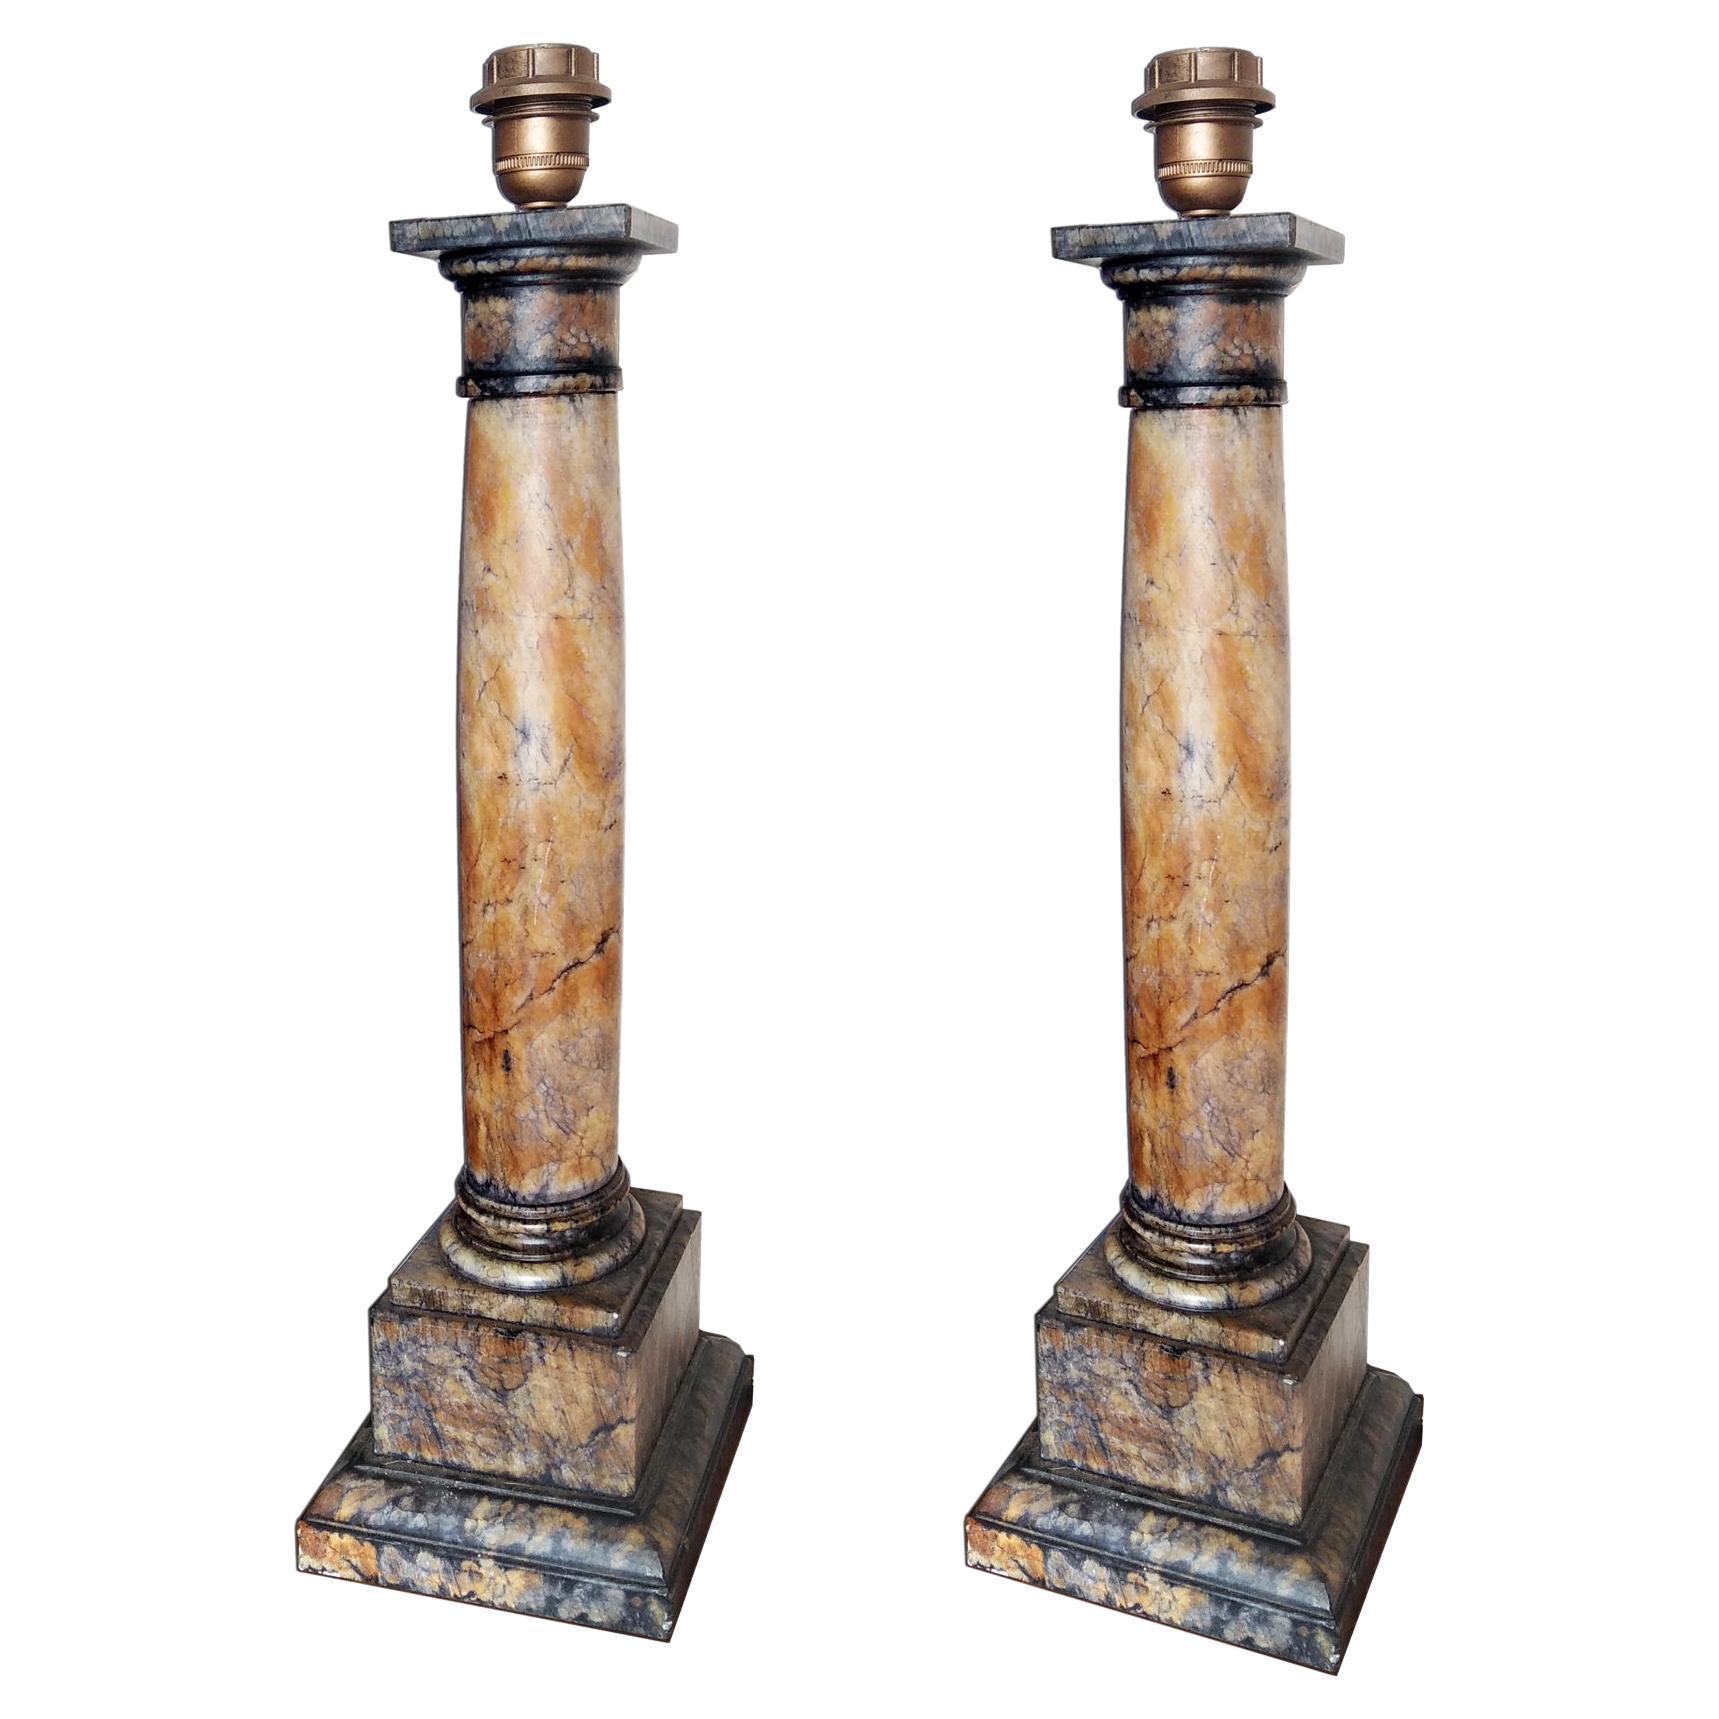  Big Size 73cm  Alabaster Table Lamps  Column Shape Italy,  20th Century